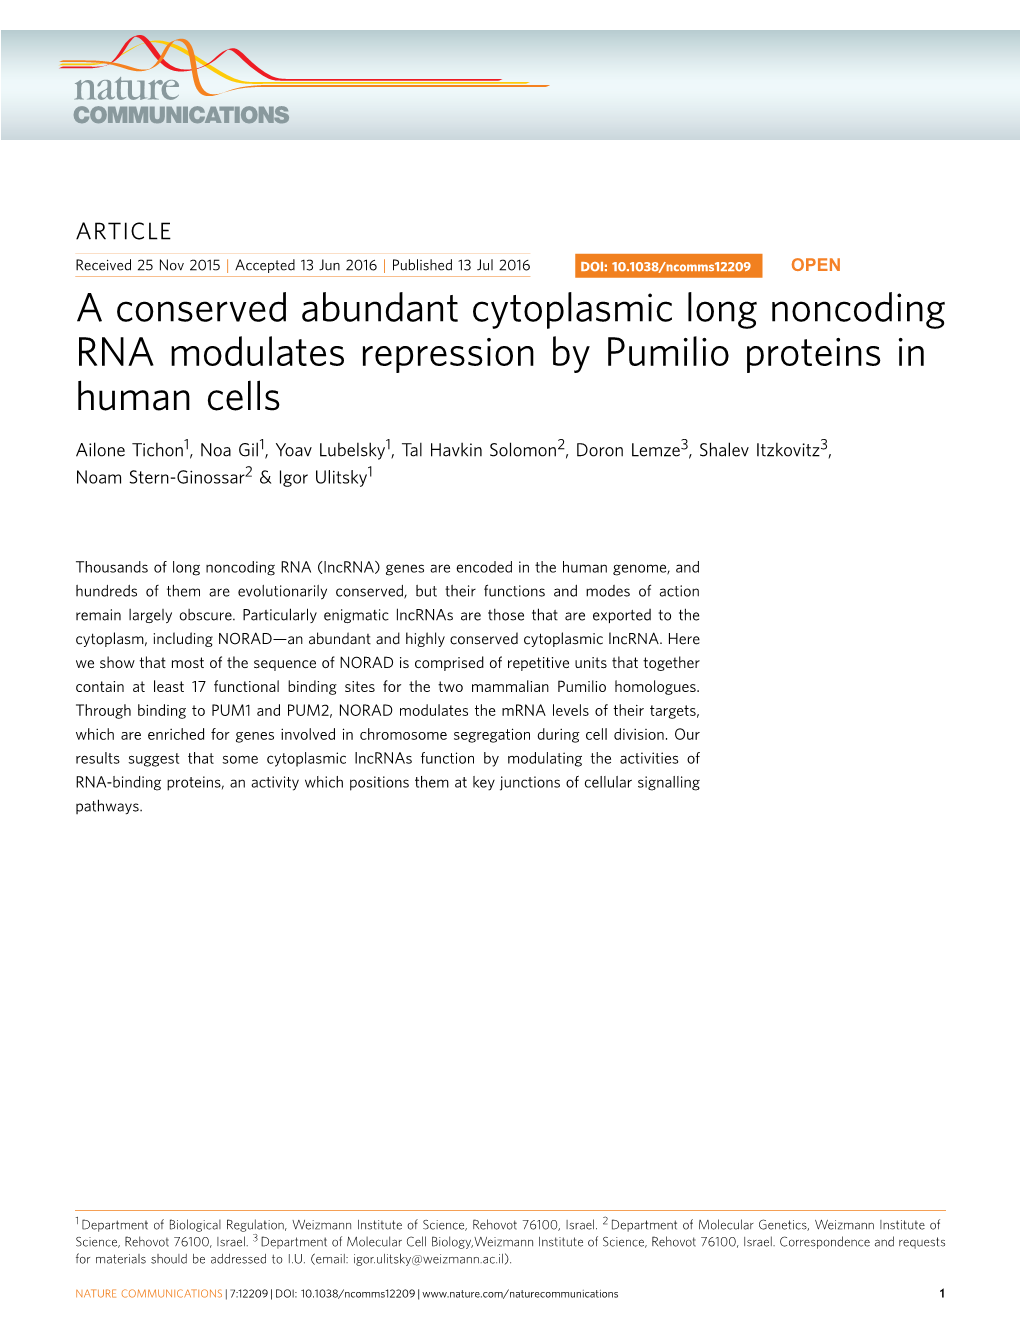 A Conserved Abundant Cytoplasmic Long Noncoding RNA Modulates Repression by Pumilio Proteins in Human Cells